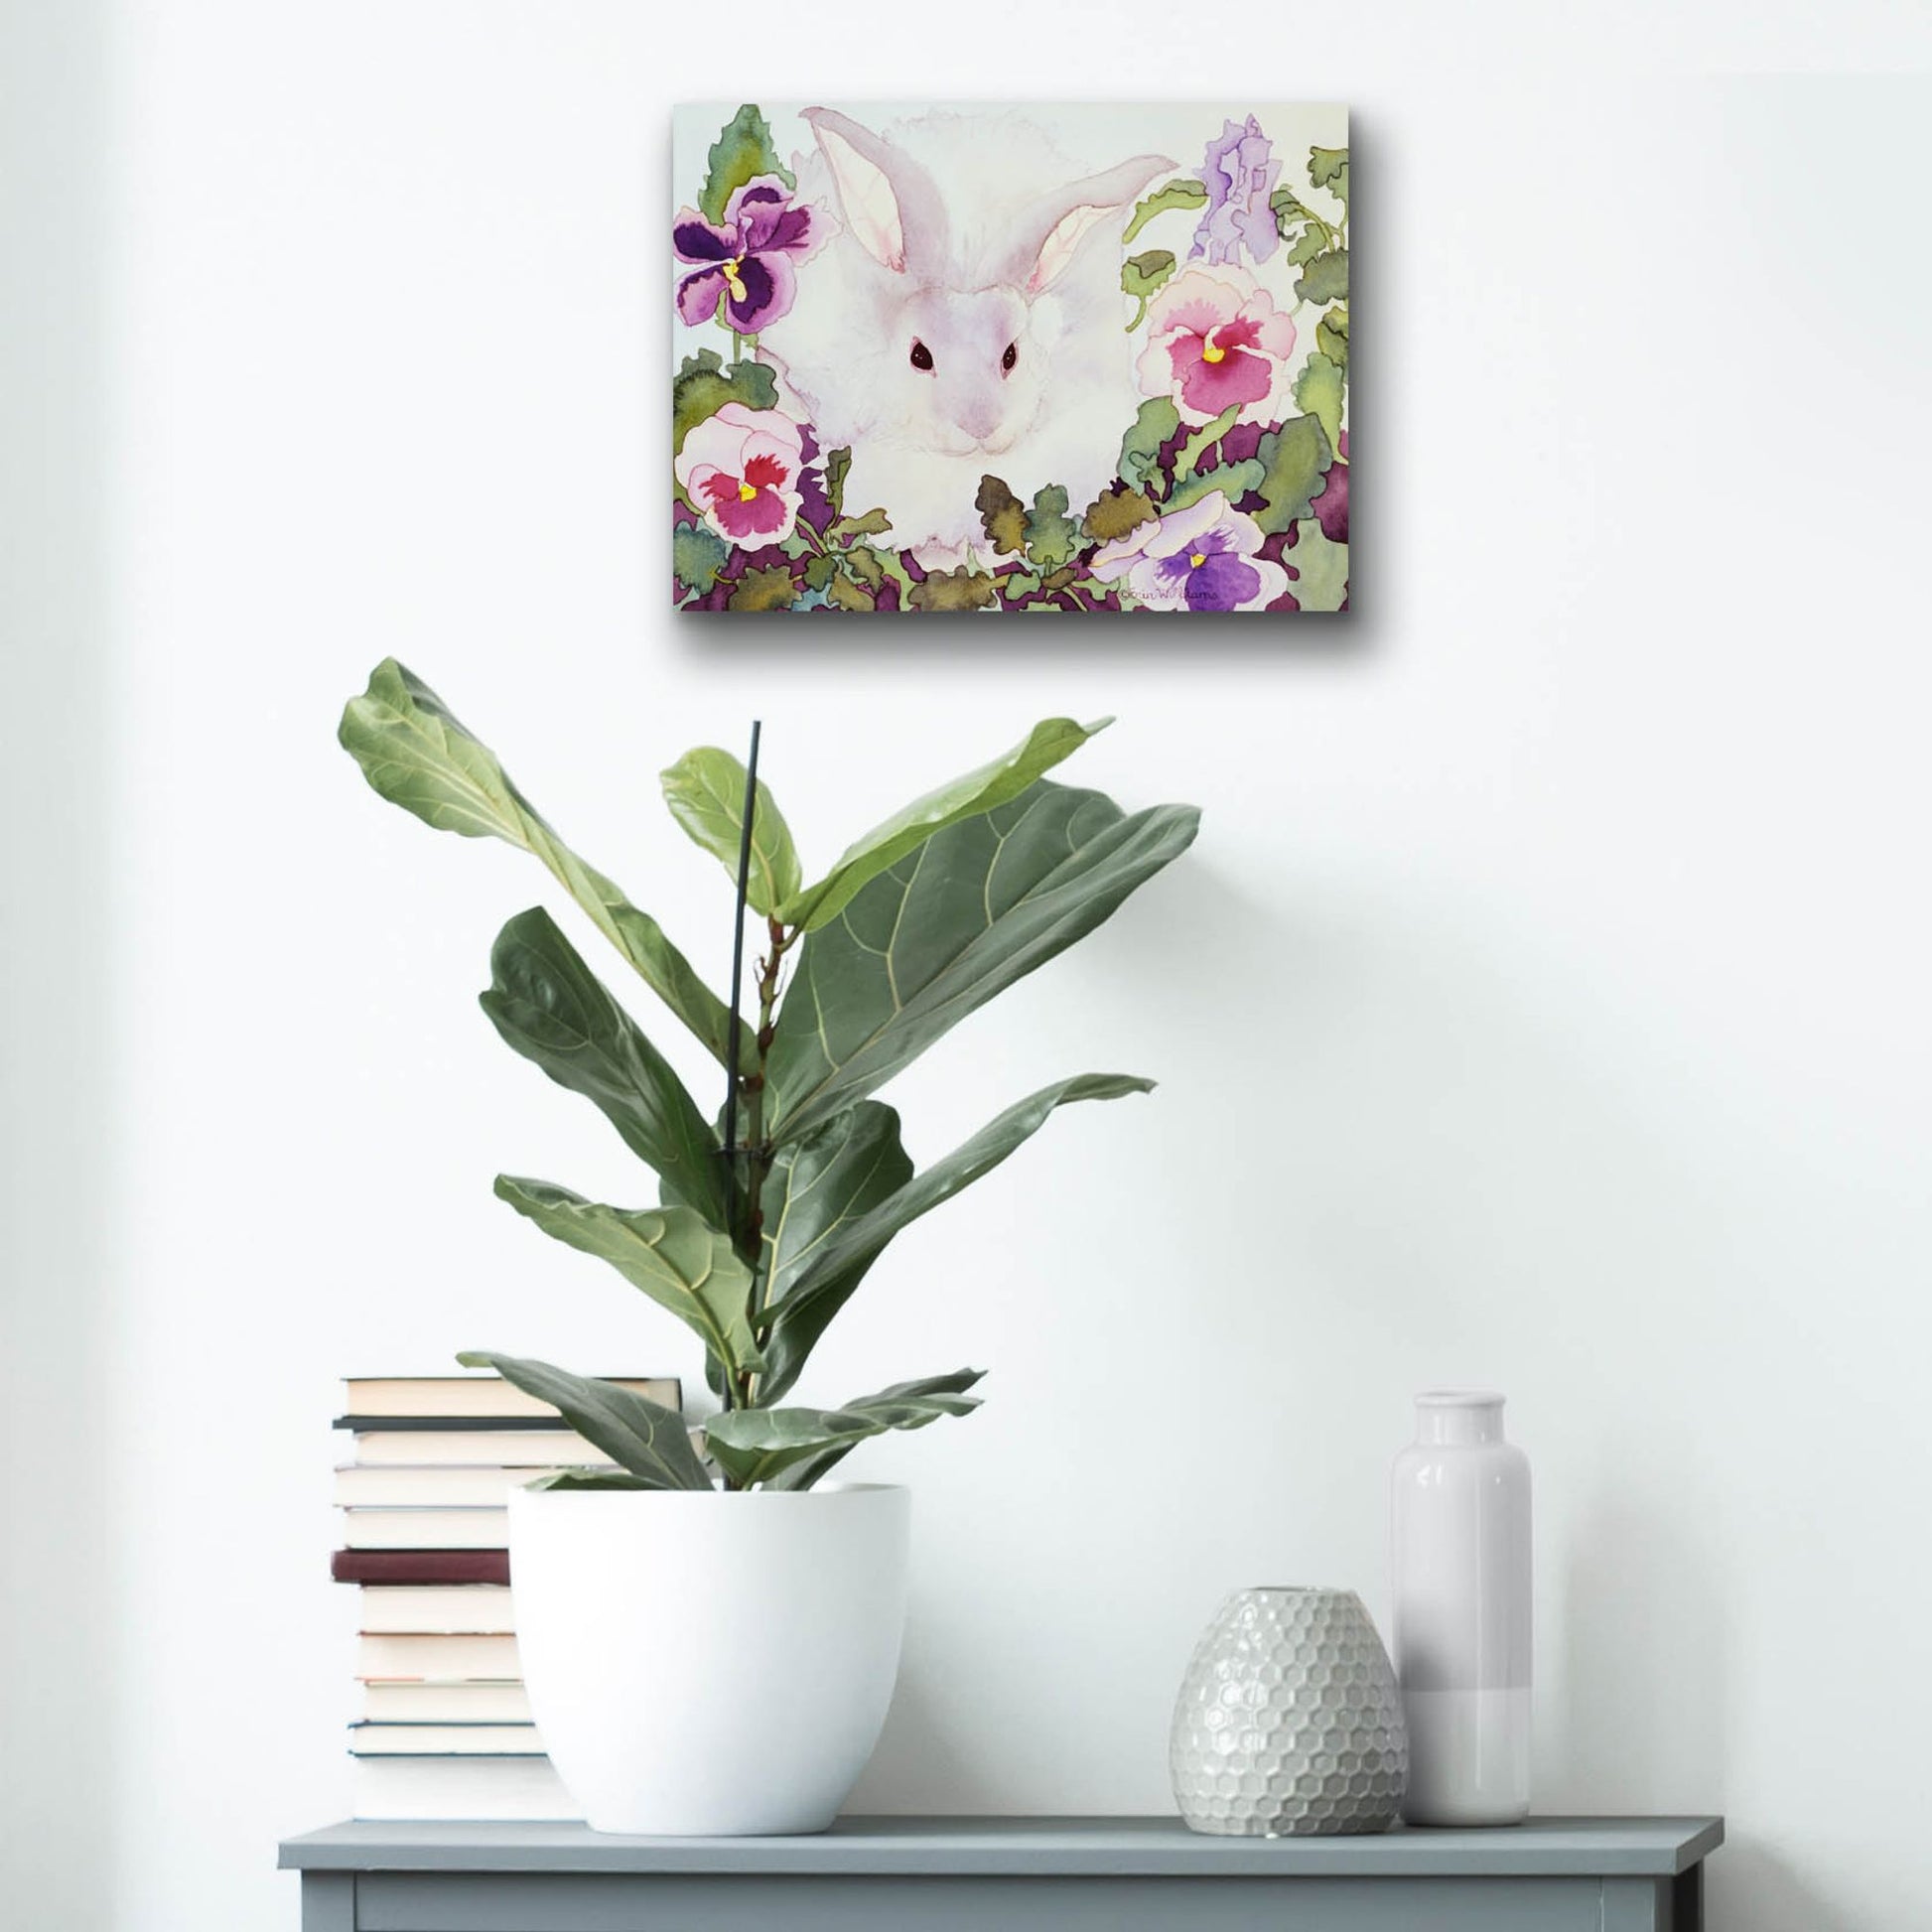 Epic Art 'Bunny with Pansies' by Carissa Luminess, Acrylic Glass Wall Art,16x12